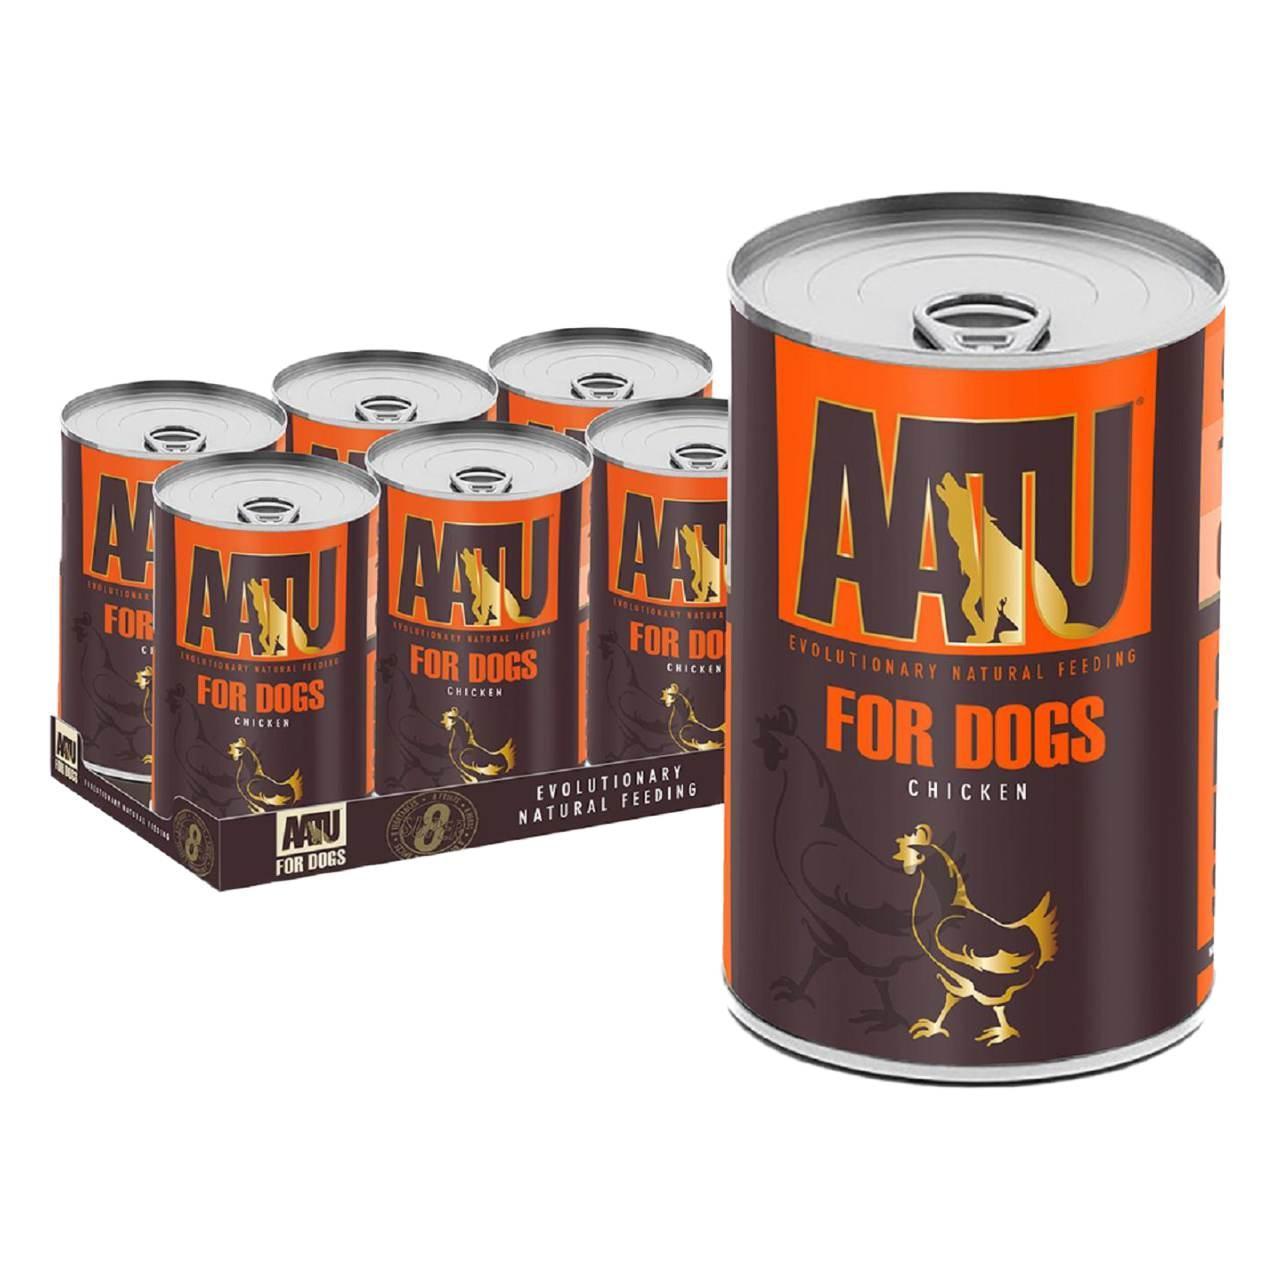 An image of AATU For Dogs Chicken Tins